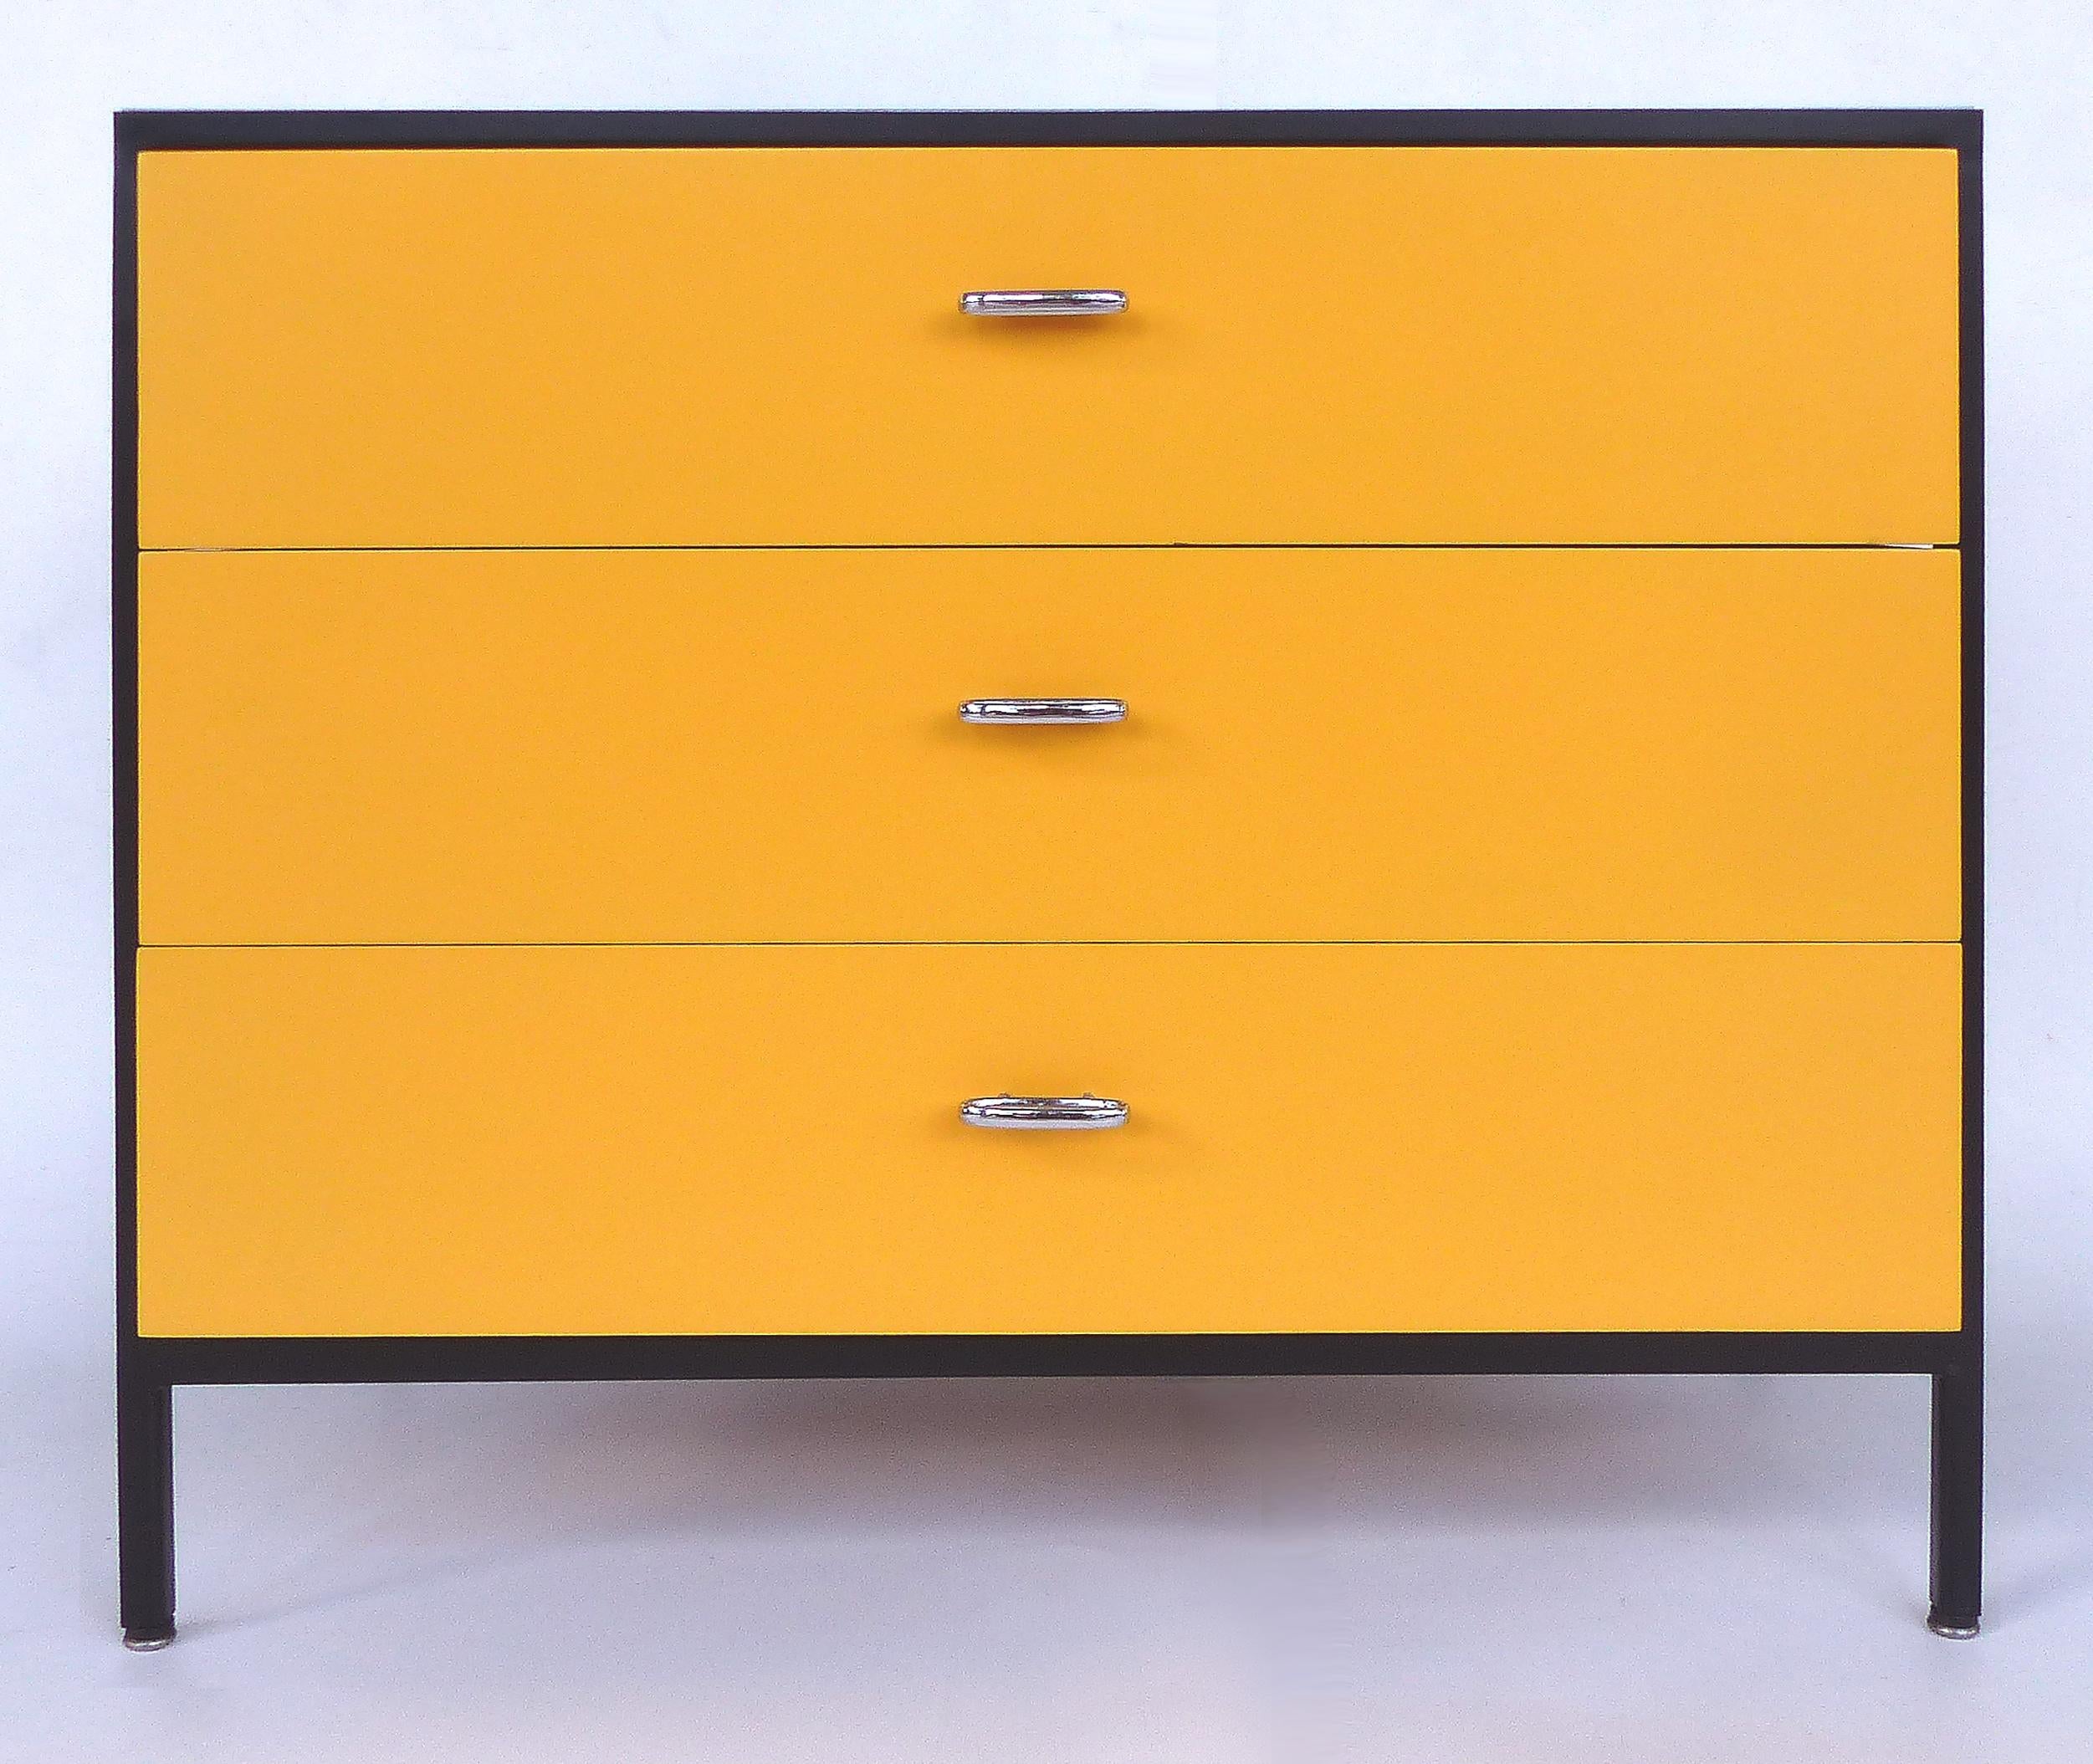 George Nelson Herman Miller Mid-century Modern Steel  Frame Chests of Drawers

Offered for sale is a pair of circa 1950's mid-century modern three-drawer chests from the steel frame series by George Nelson for Herman Miller.  These brightly colored